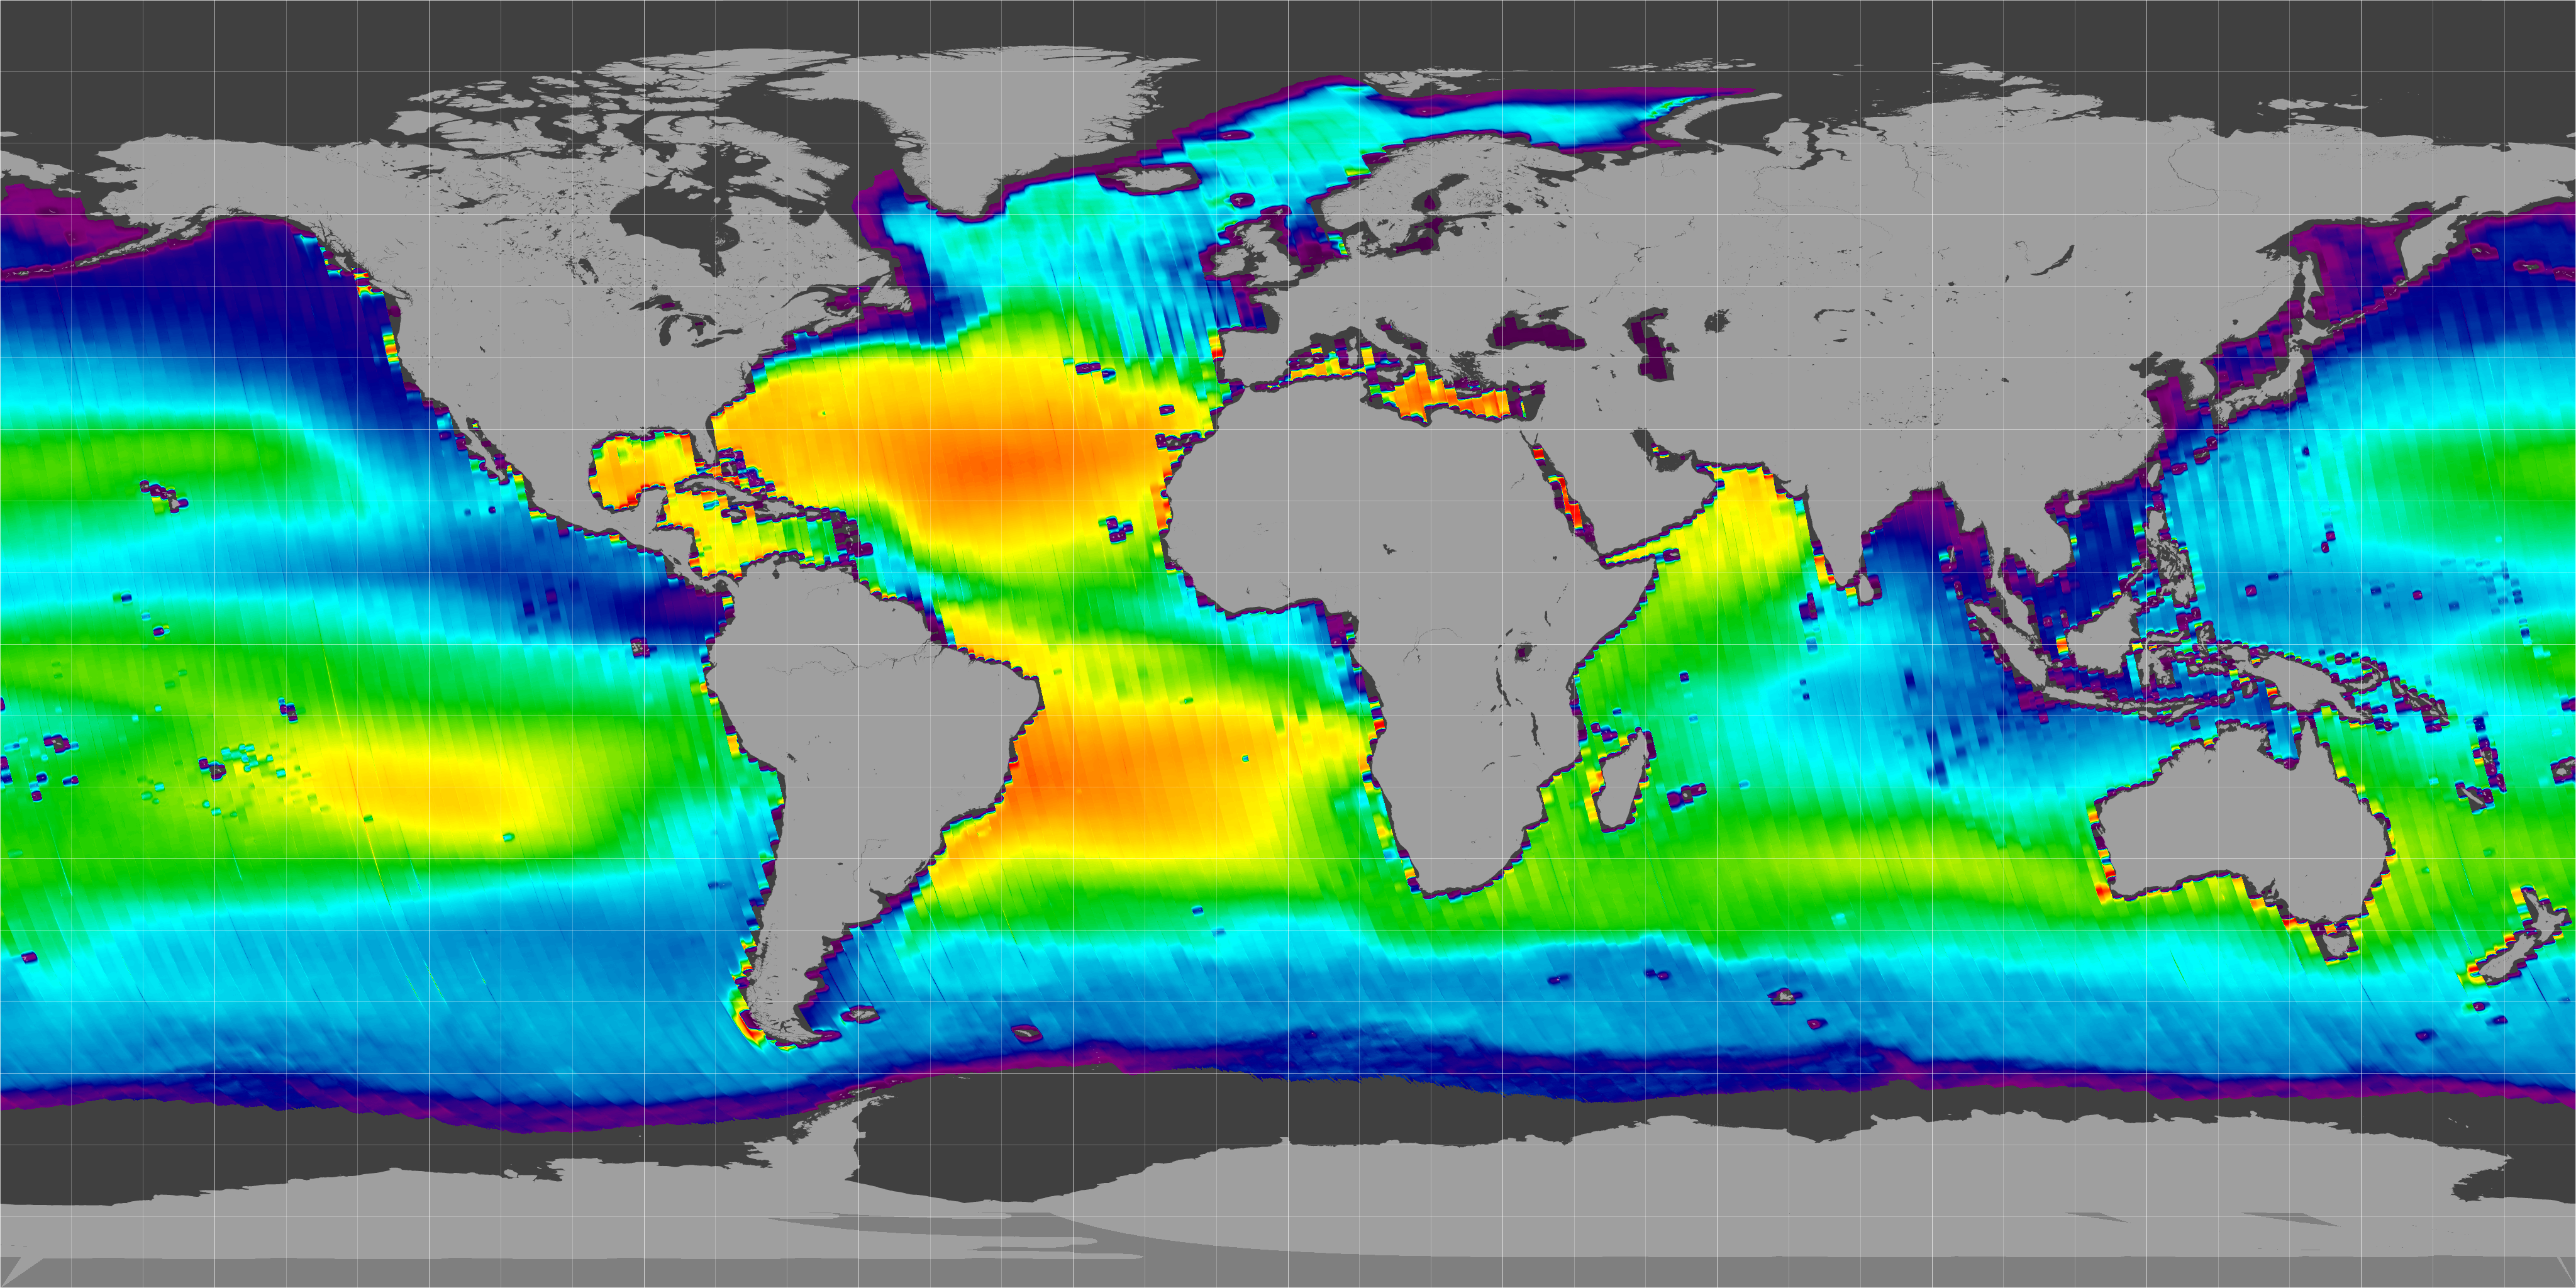 Global sea surface salinity, 25-Aug-11 to 05-May-15 (flat, ascending)